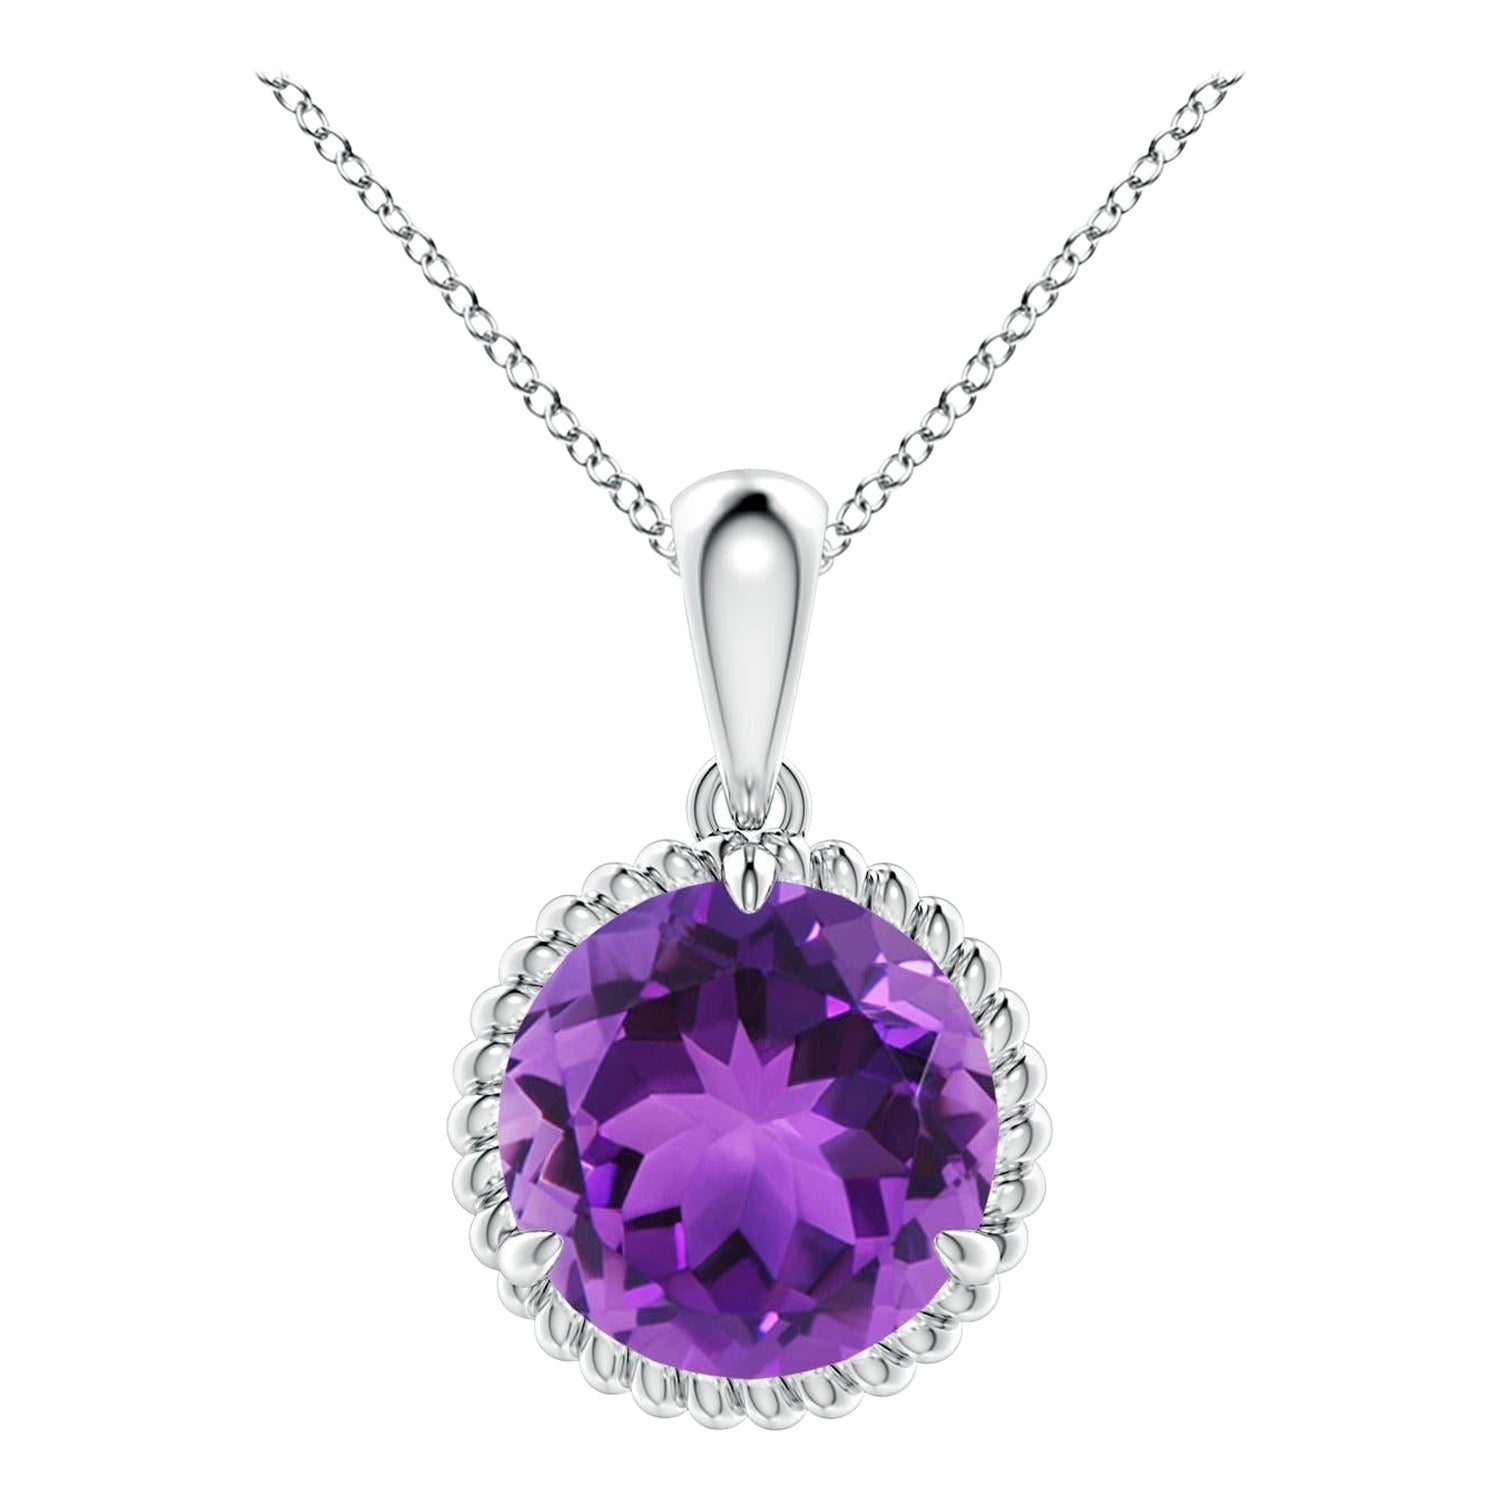 Natural Rope-Framed 2.45ct Amethyst Solitaire Pendant in 14K White Gold